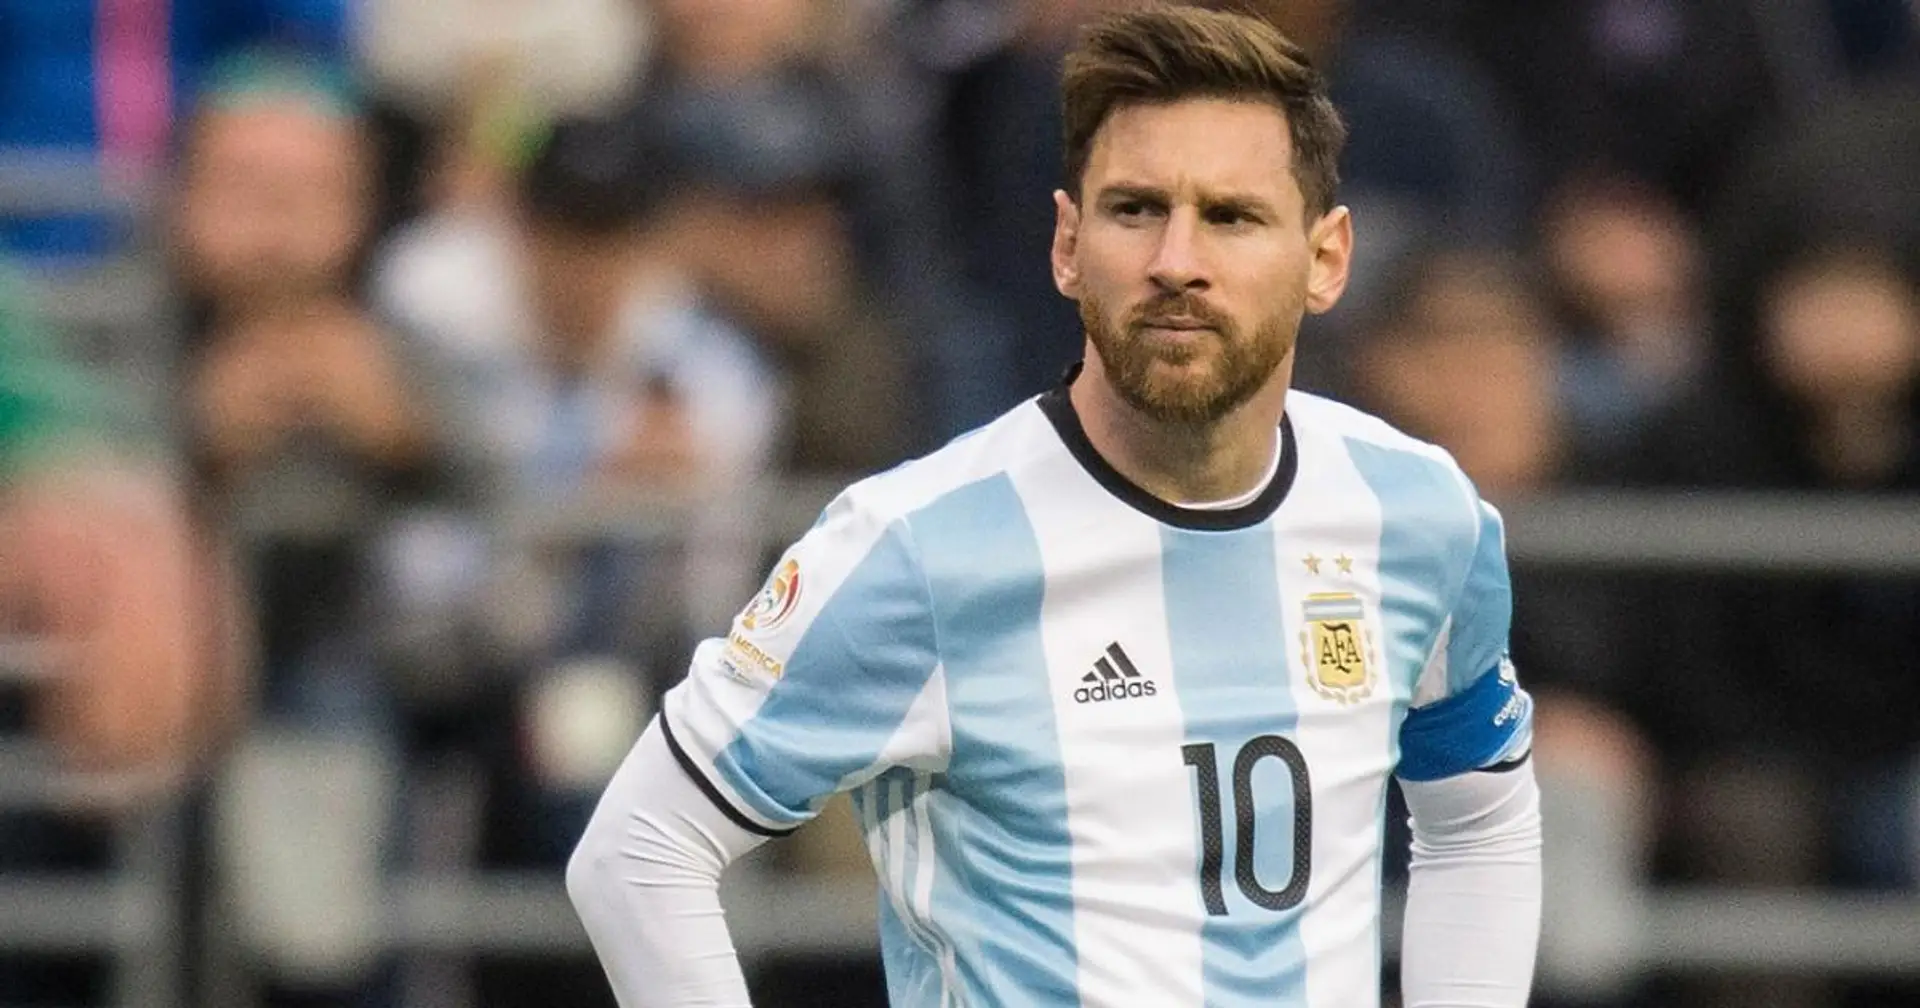 'If Messi represented Spain, he would have won World Cup: ex-Espanyol's defender Joan Capdevila